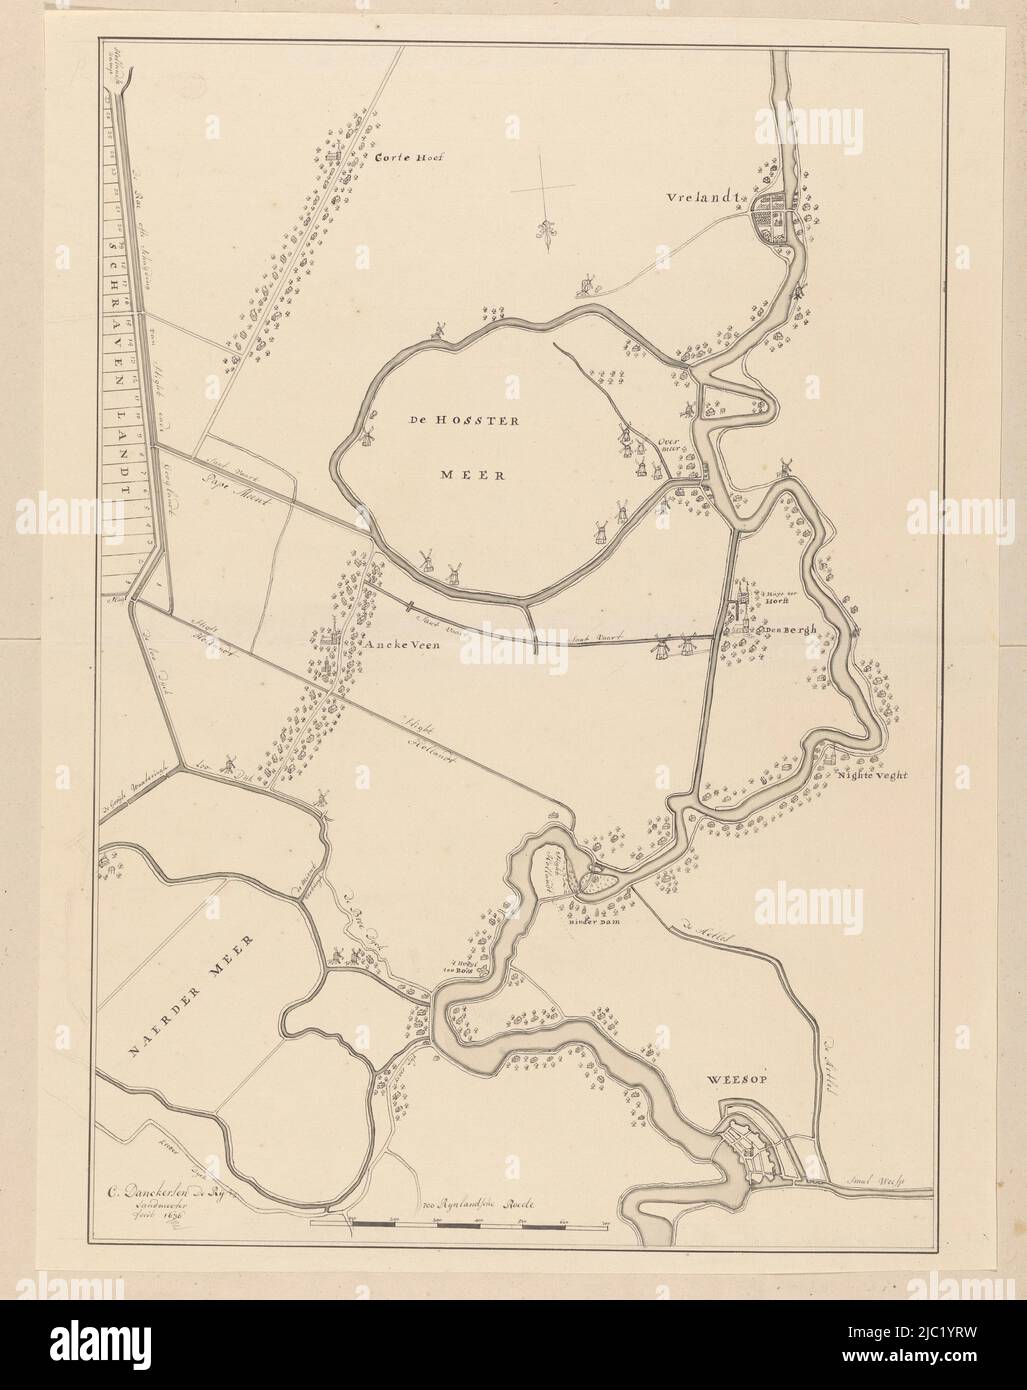 Manuscript map of part of the Gooi, with the course of the Vecht from Vreeland to Weesp, the Naardermeerpolder, the Hostermeerpolder and surrounding areas. At the bottom of a scale stick: 700 Rynlandsche roede., Map of a part of the Gooi., draughtsman: Cornelis Danckerts de Rij (II), (mentioned on object), Cornelis Danckerts de Rij (II), (mentioned on object), Amsterdam, 1636 - 1799, paper, pen, brush, h 618 mm × w 470 mm Stock Photo